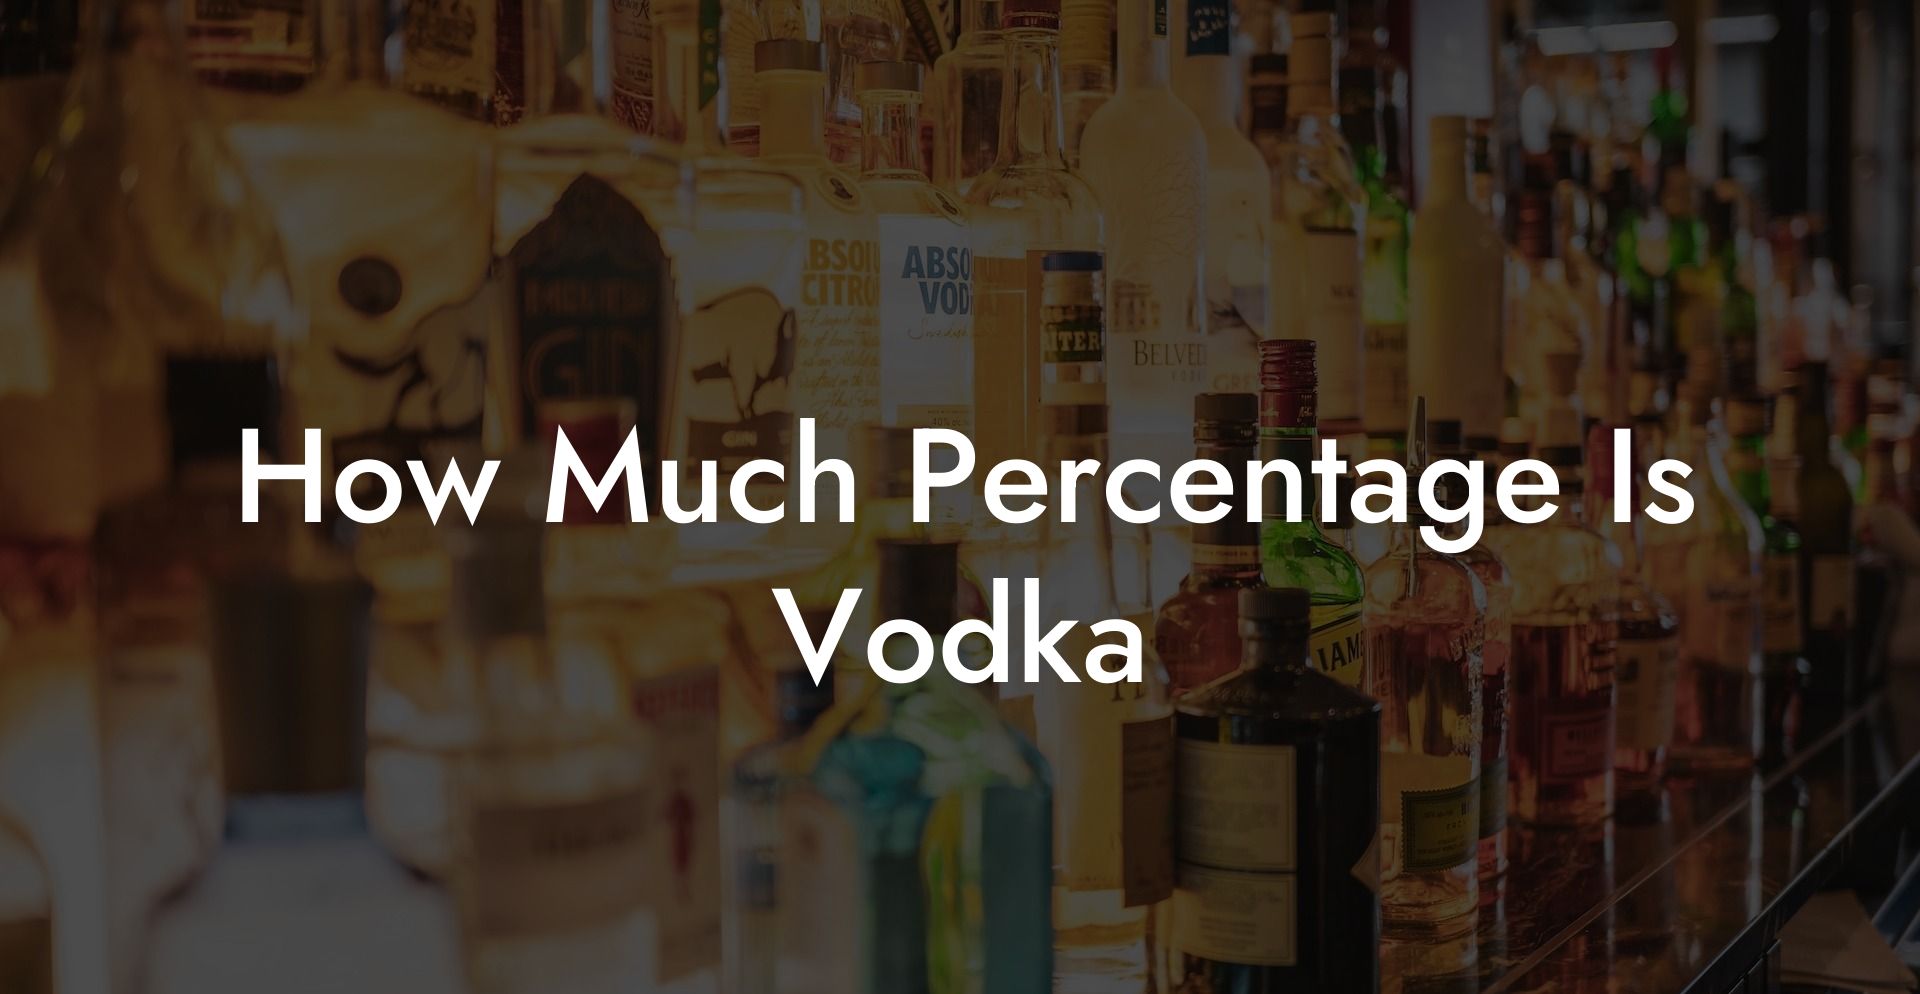 How Much Percentage Is Vodka